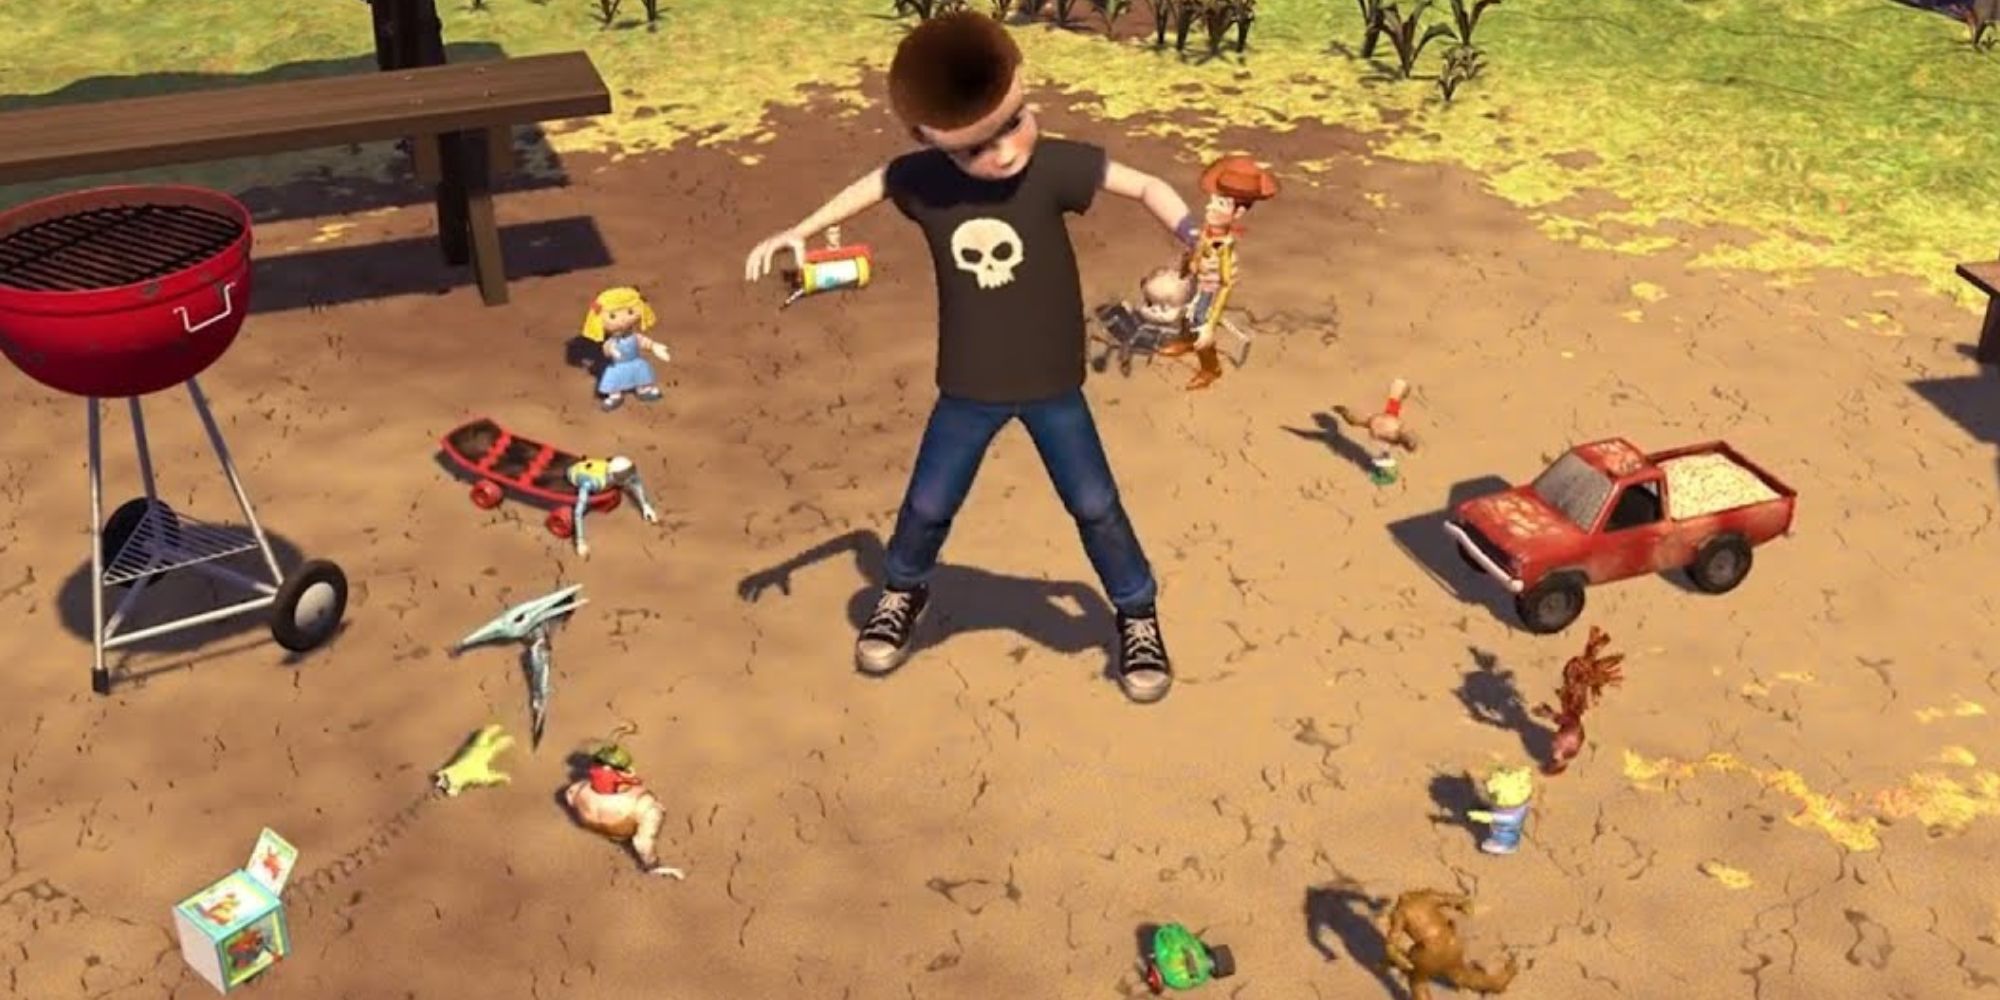 Sid in Toy Story being confronted by his ominous toy collection